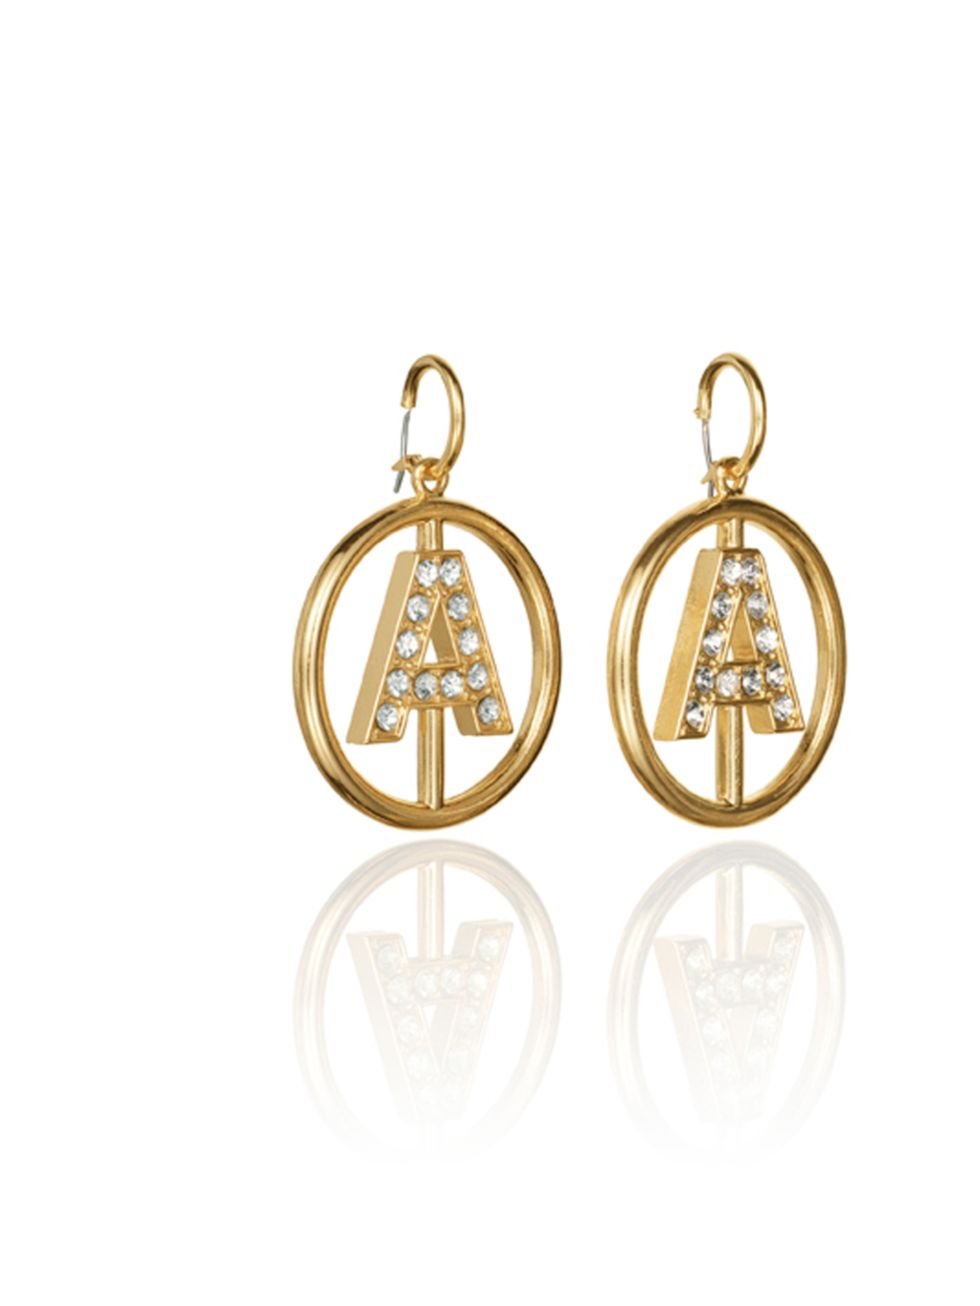 <p><a href="http://www.hm.com/gb/anna-dello-russo">ADR for H&amp;M</a> 'A' hoop earrings, £14.99, for stockists call 0844 736 9000</p>